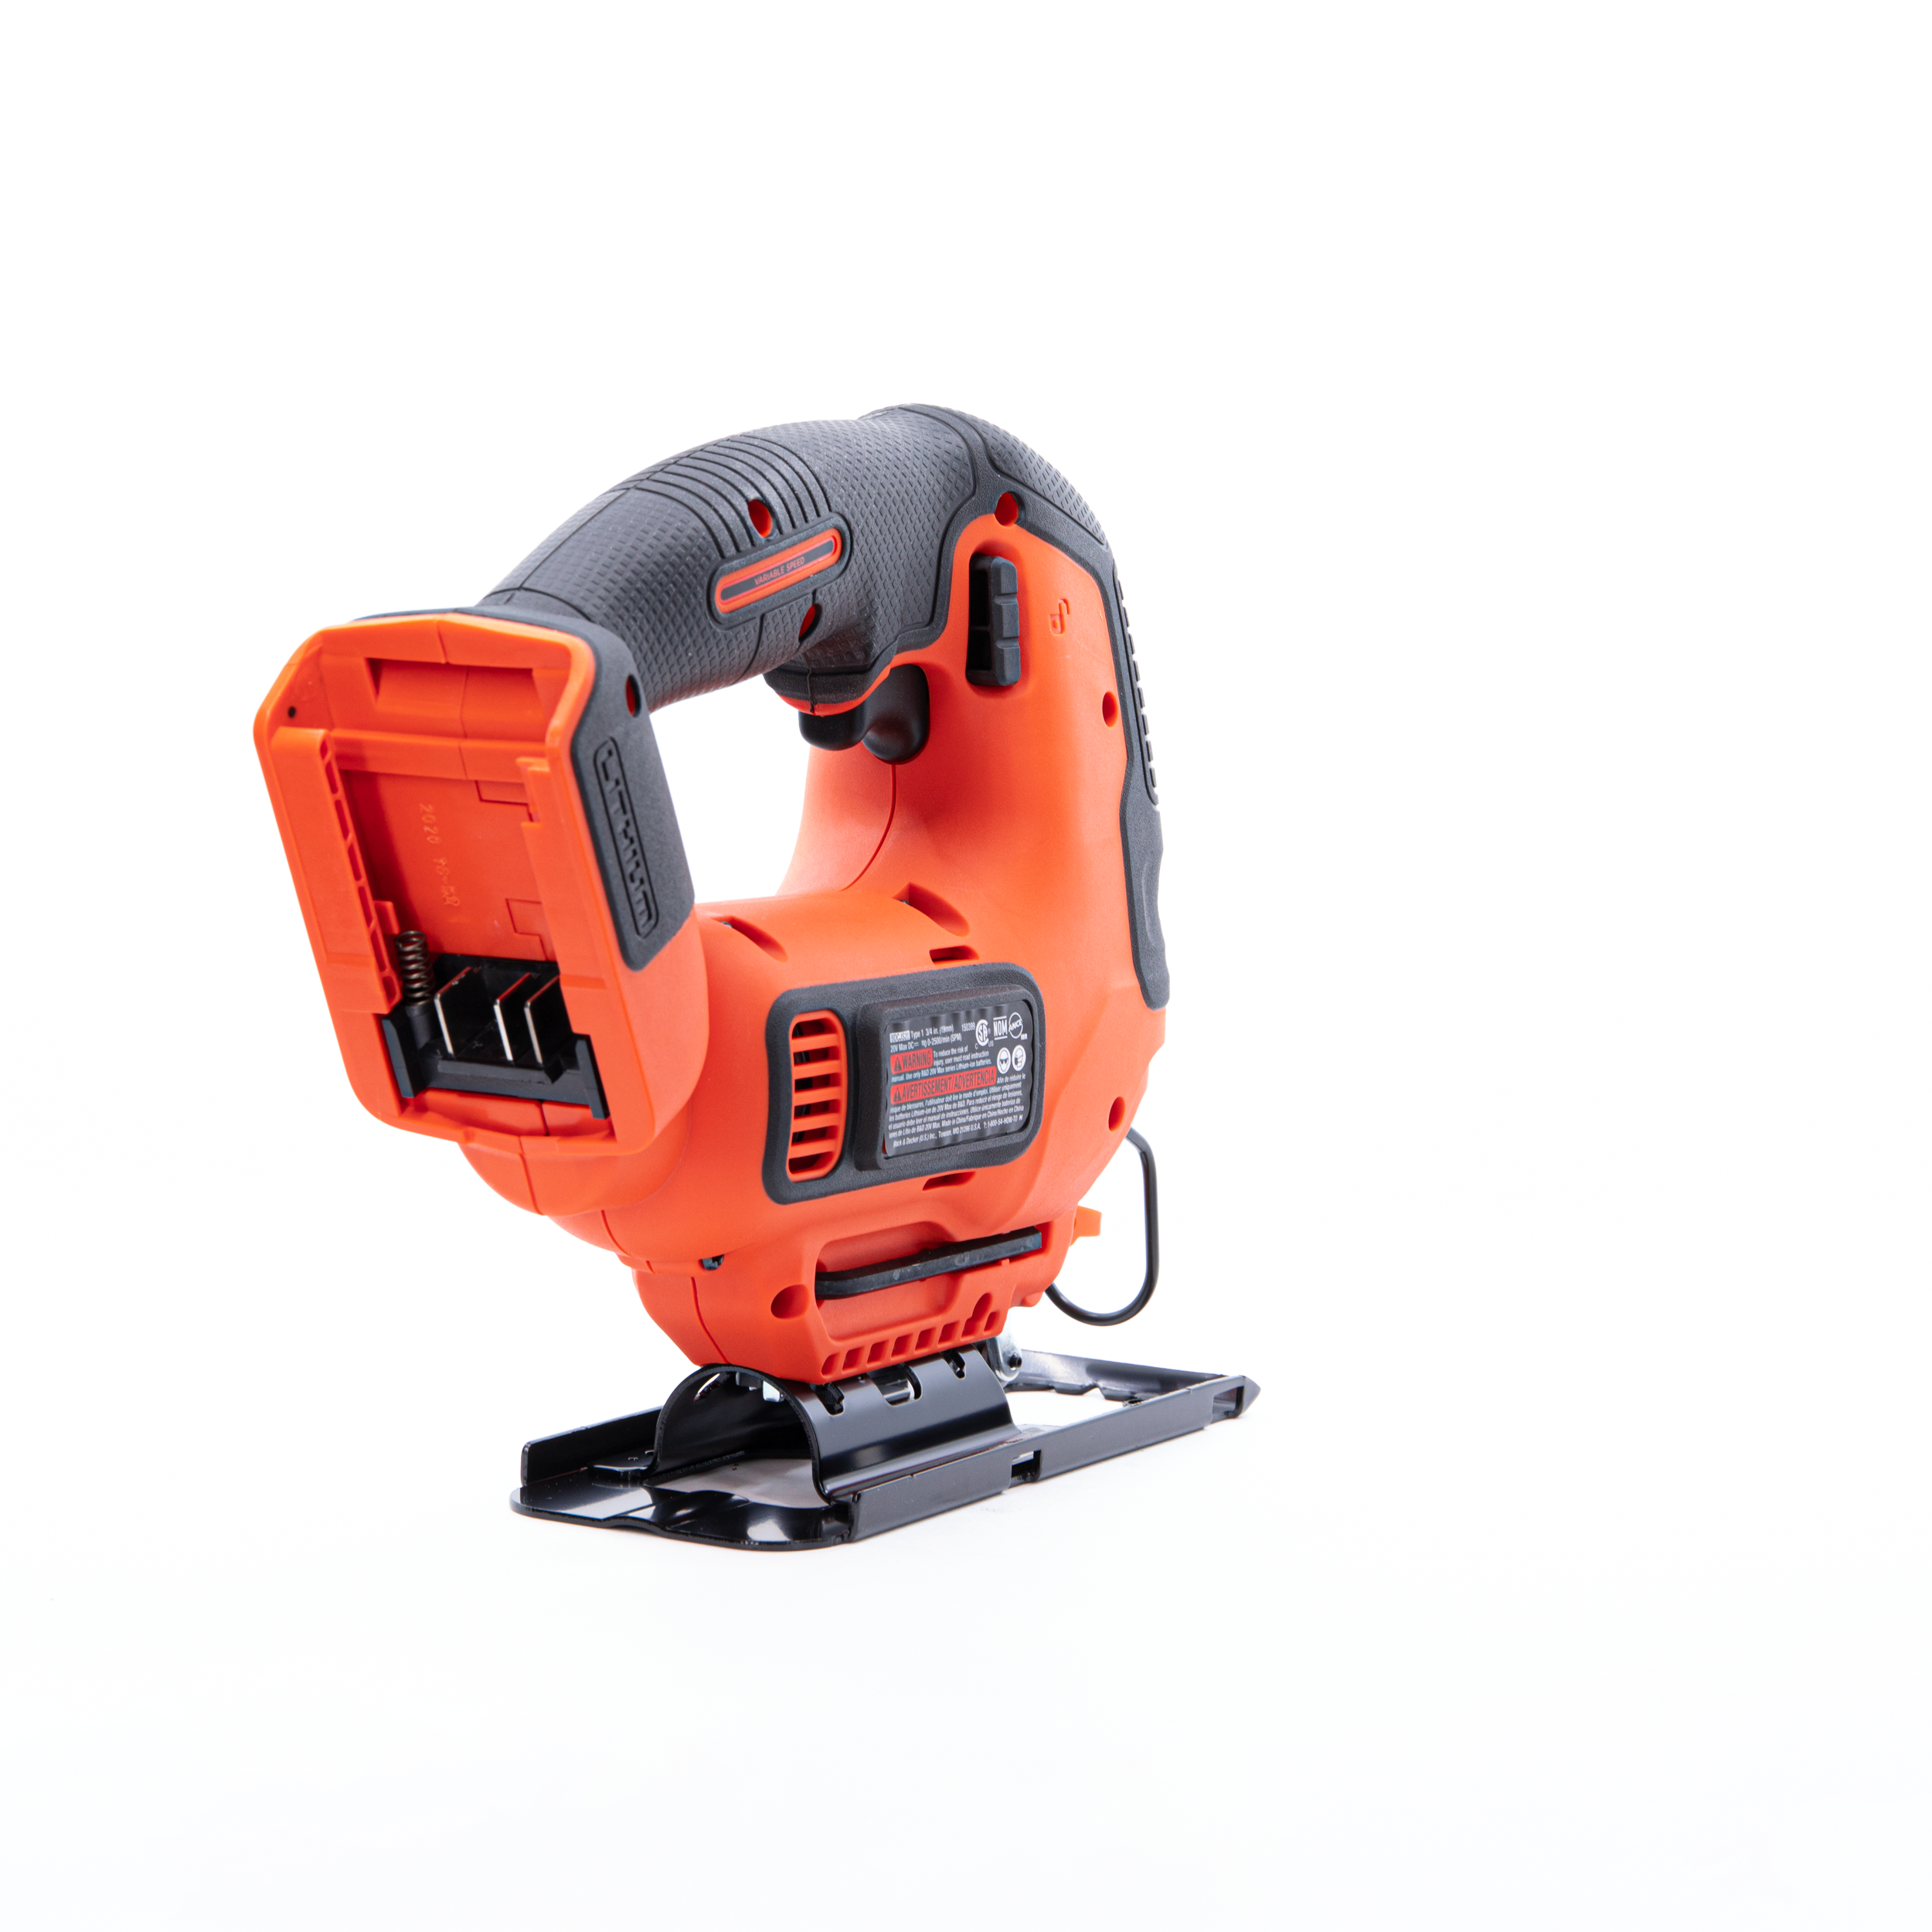 BLACK+DECKER 20V MAX Lithium-Ion Cordless Jig Saw (Tool Only) BDCJS20B -  The Home Depot